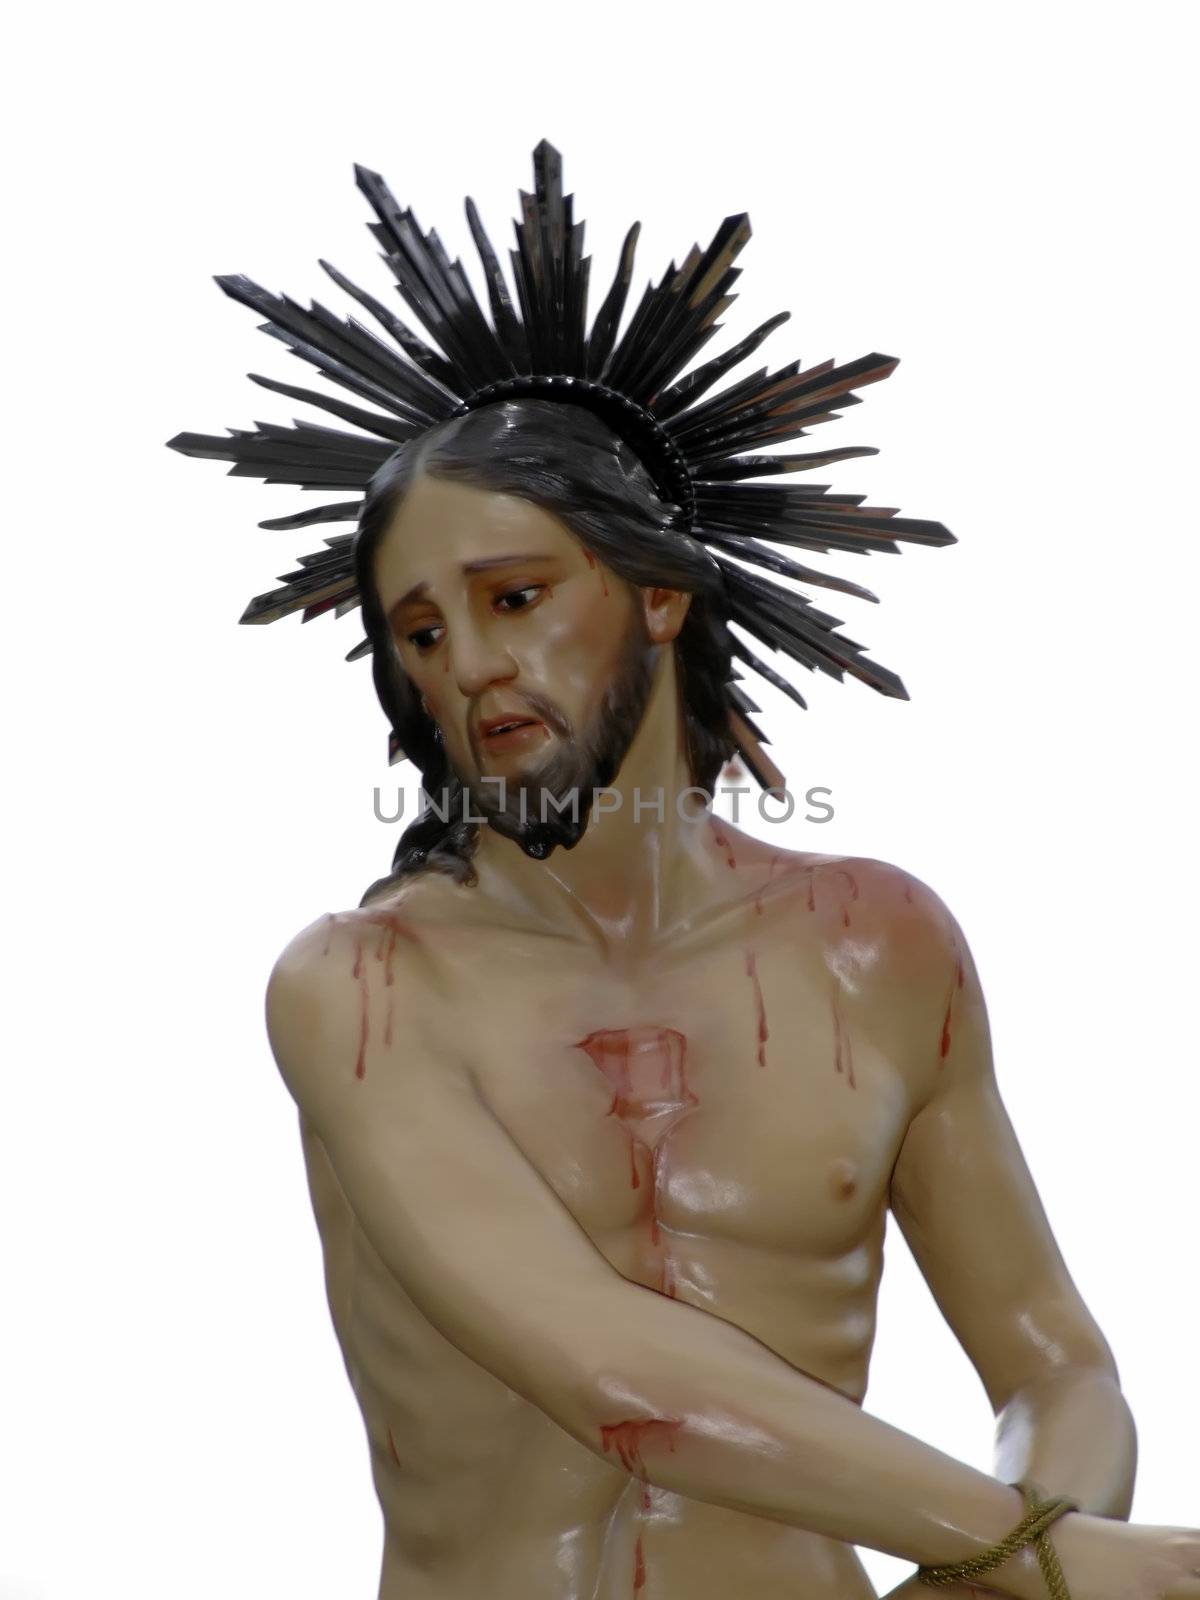 Statue of Jesus - The Flogging during His Passion